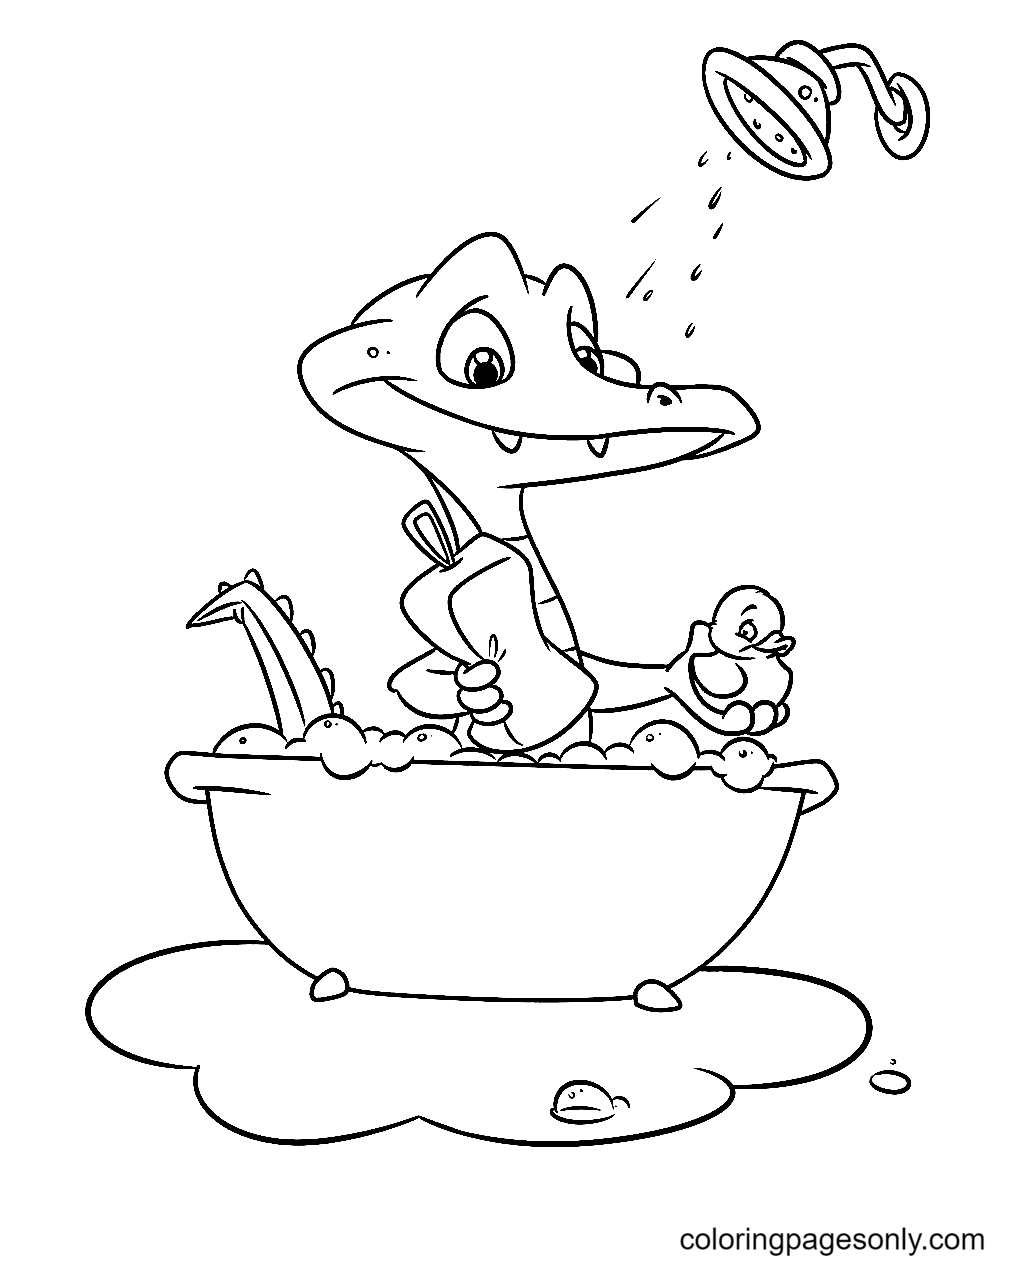 Little Alligator Swims Bathroom Coloring Pages